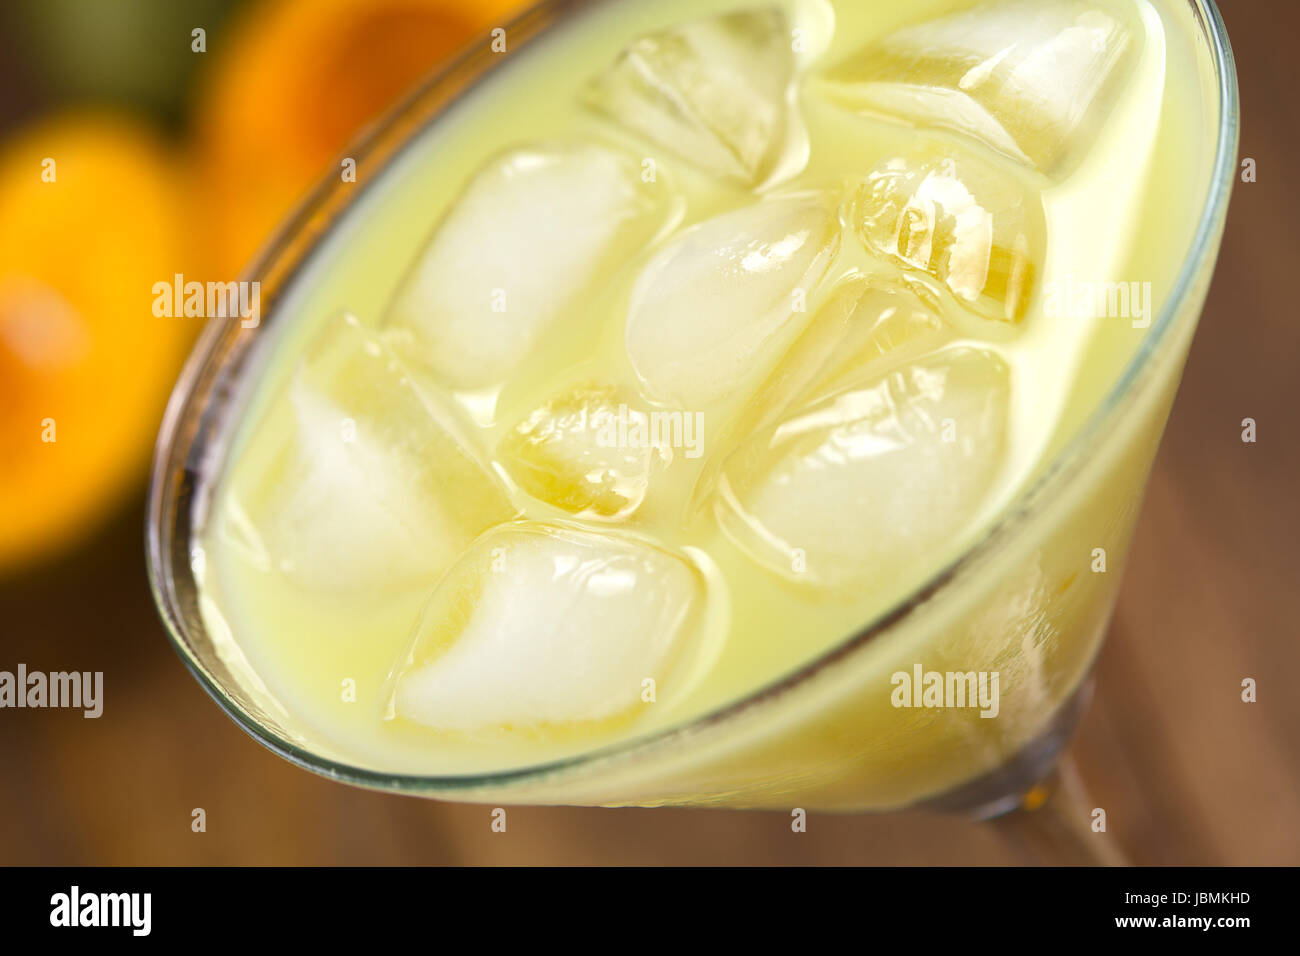 Peruvian cream liqueur made of lucuma fruit served in cocktail glass with ice cubes (Selective Focus, Focus one third into the ice cubes) Stock Photo